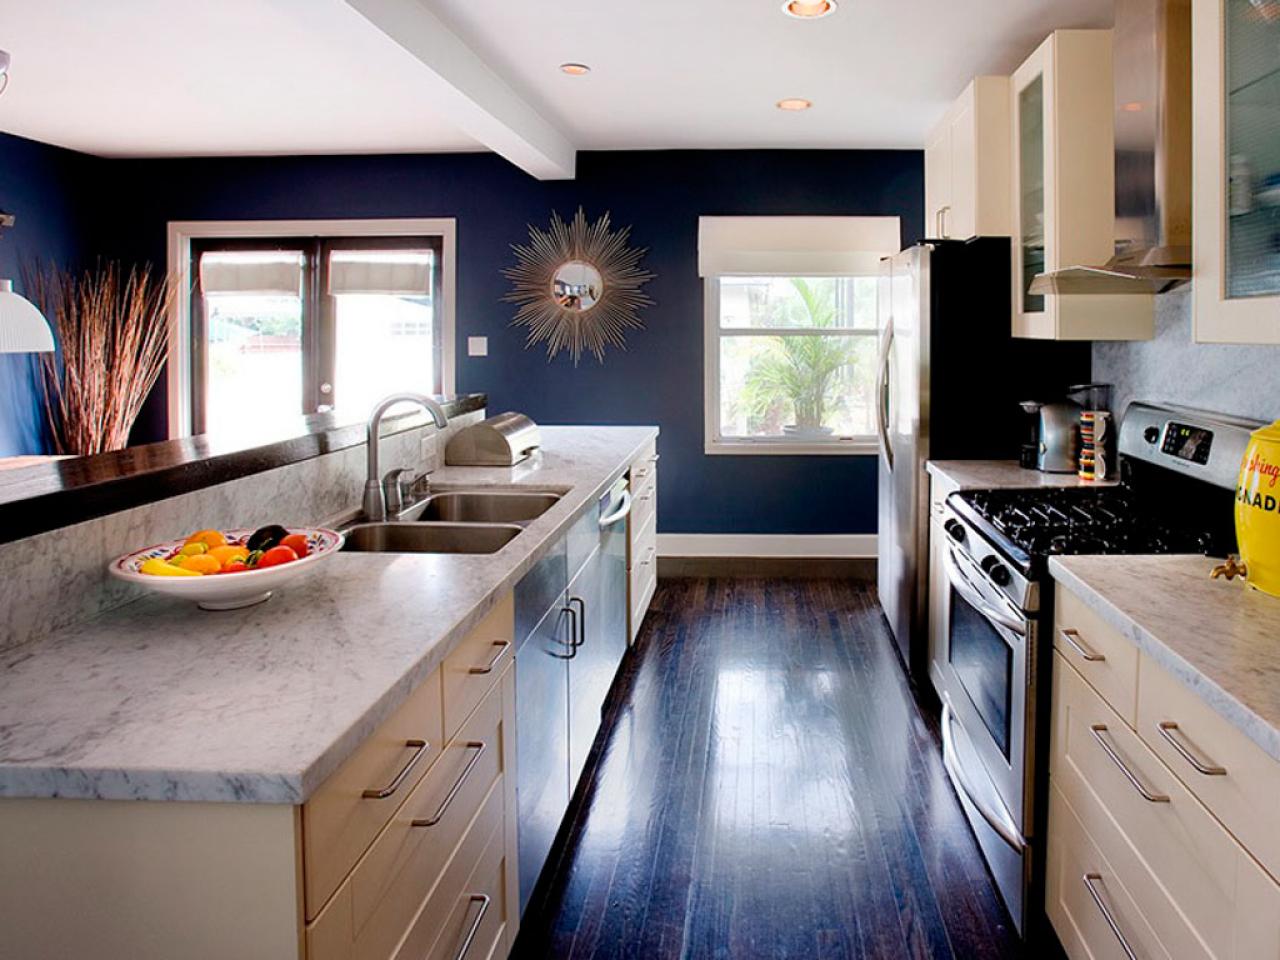 Ideas for Updating Kitchen Countertops + Pictures From HGTV   HGTV